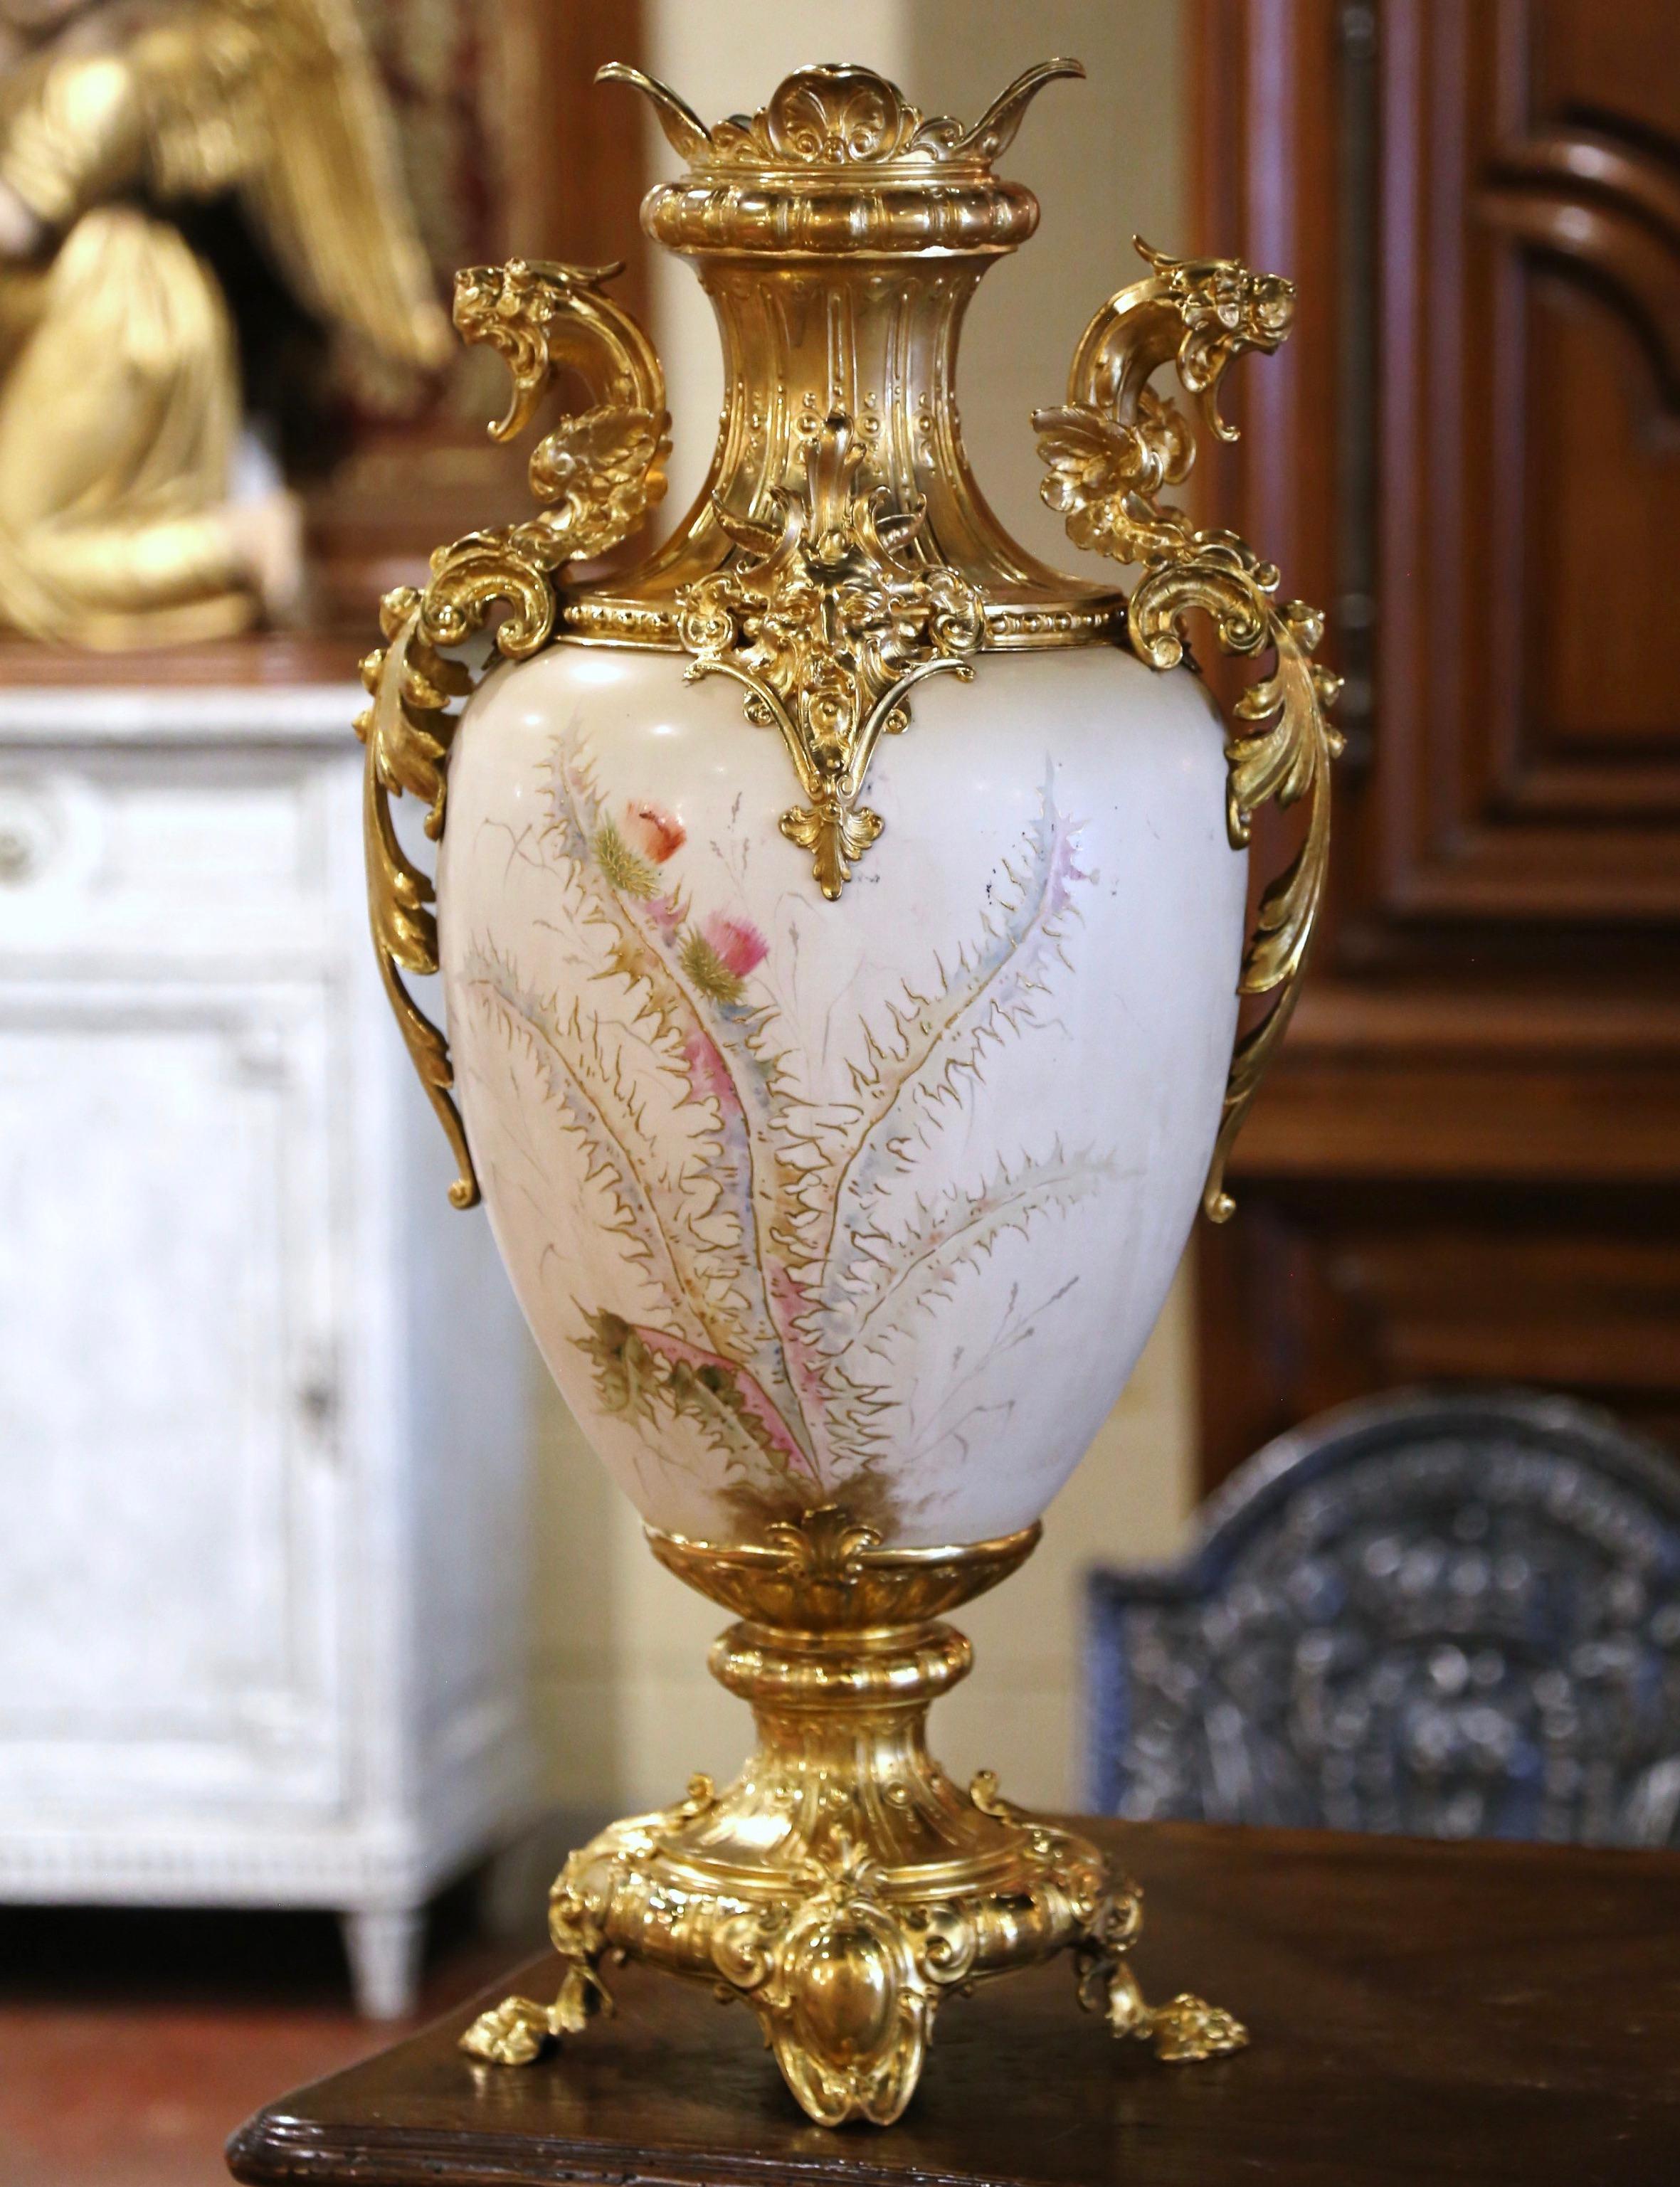 Decorate a console, commode, or table with this elegant and colorful decorative urn. Crafted in France circa 1960 and built of gold platted brass and porcelain, the tall vase features mythical creature mounts, including two winged lion handles and